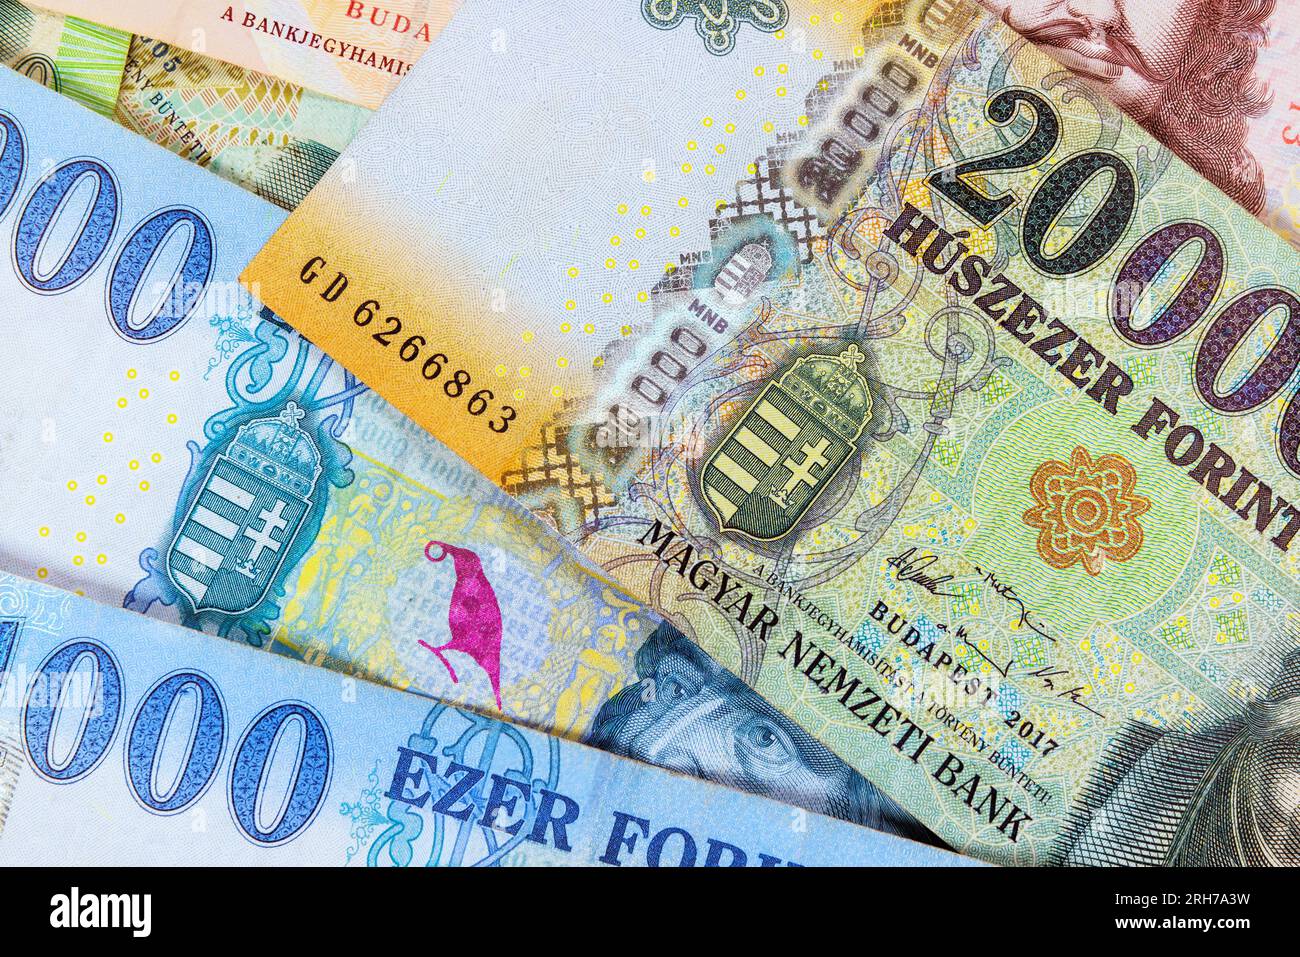 Hungarian forints, highlighting HUF cash varying denominations their visual appeal. Stock Photo